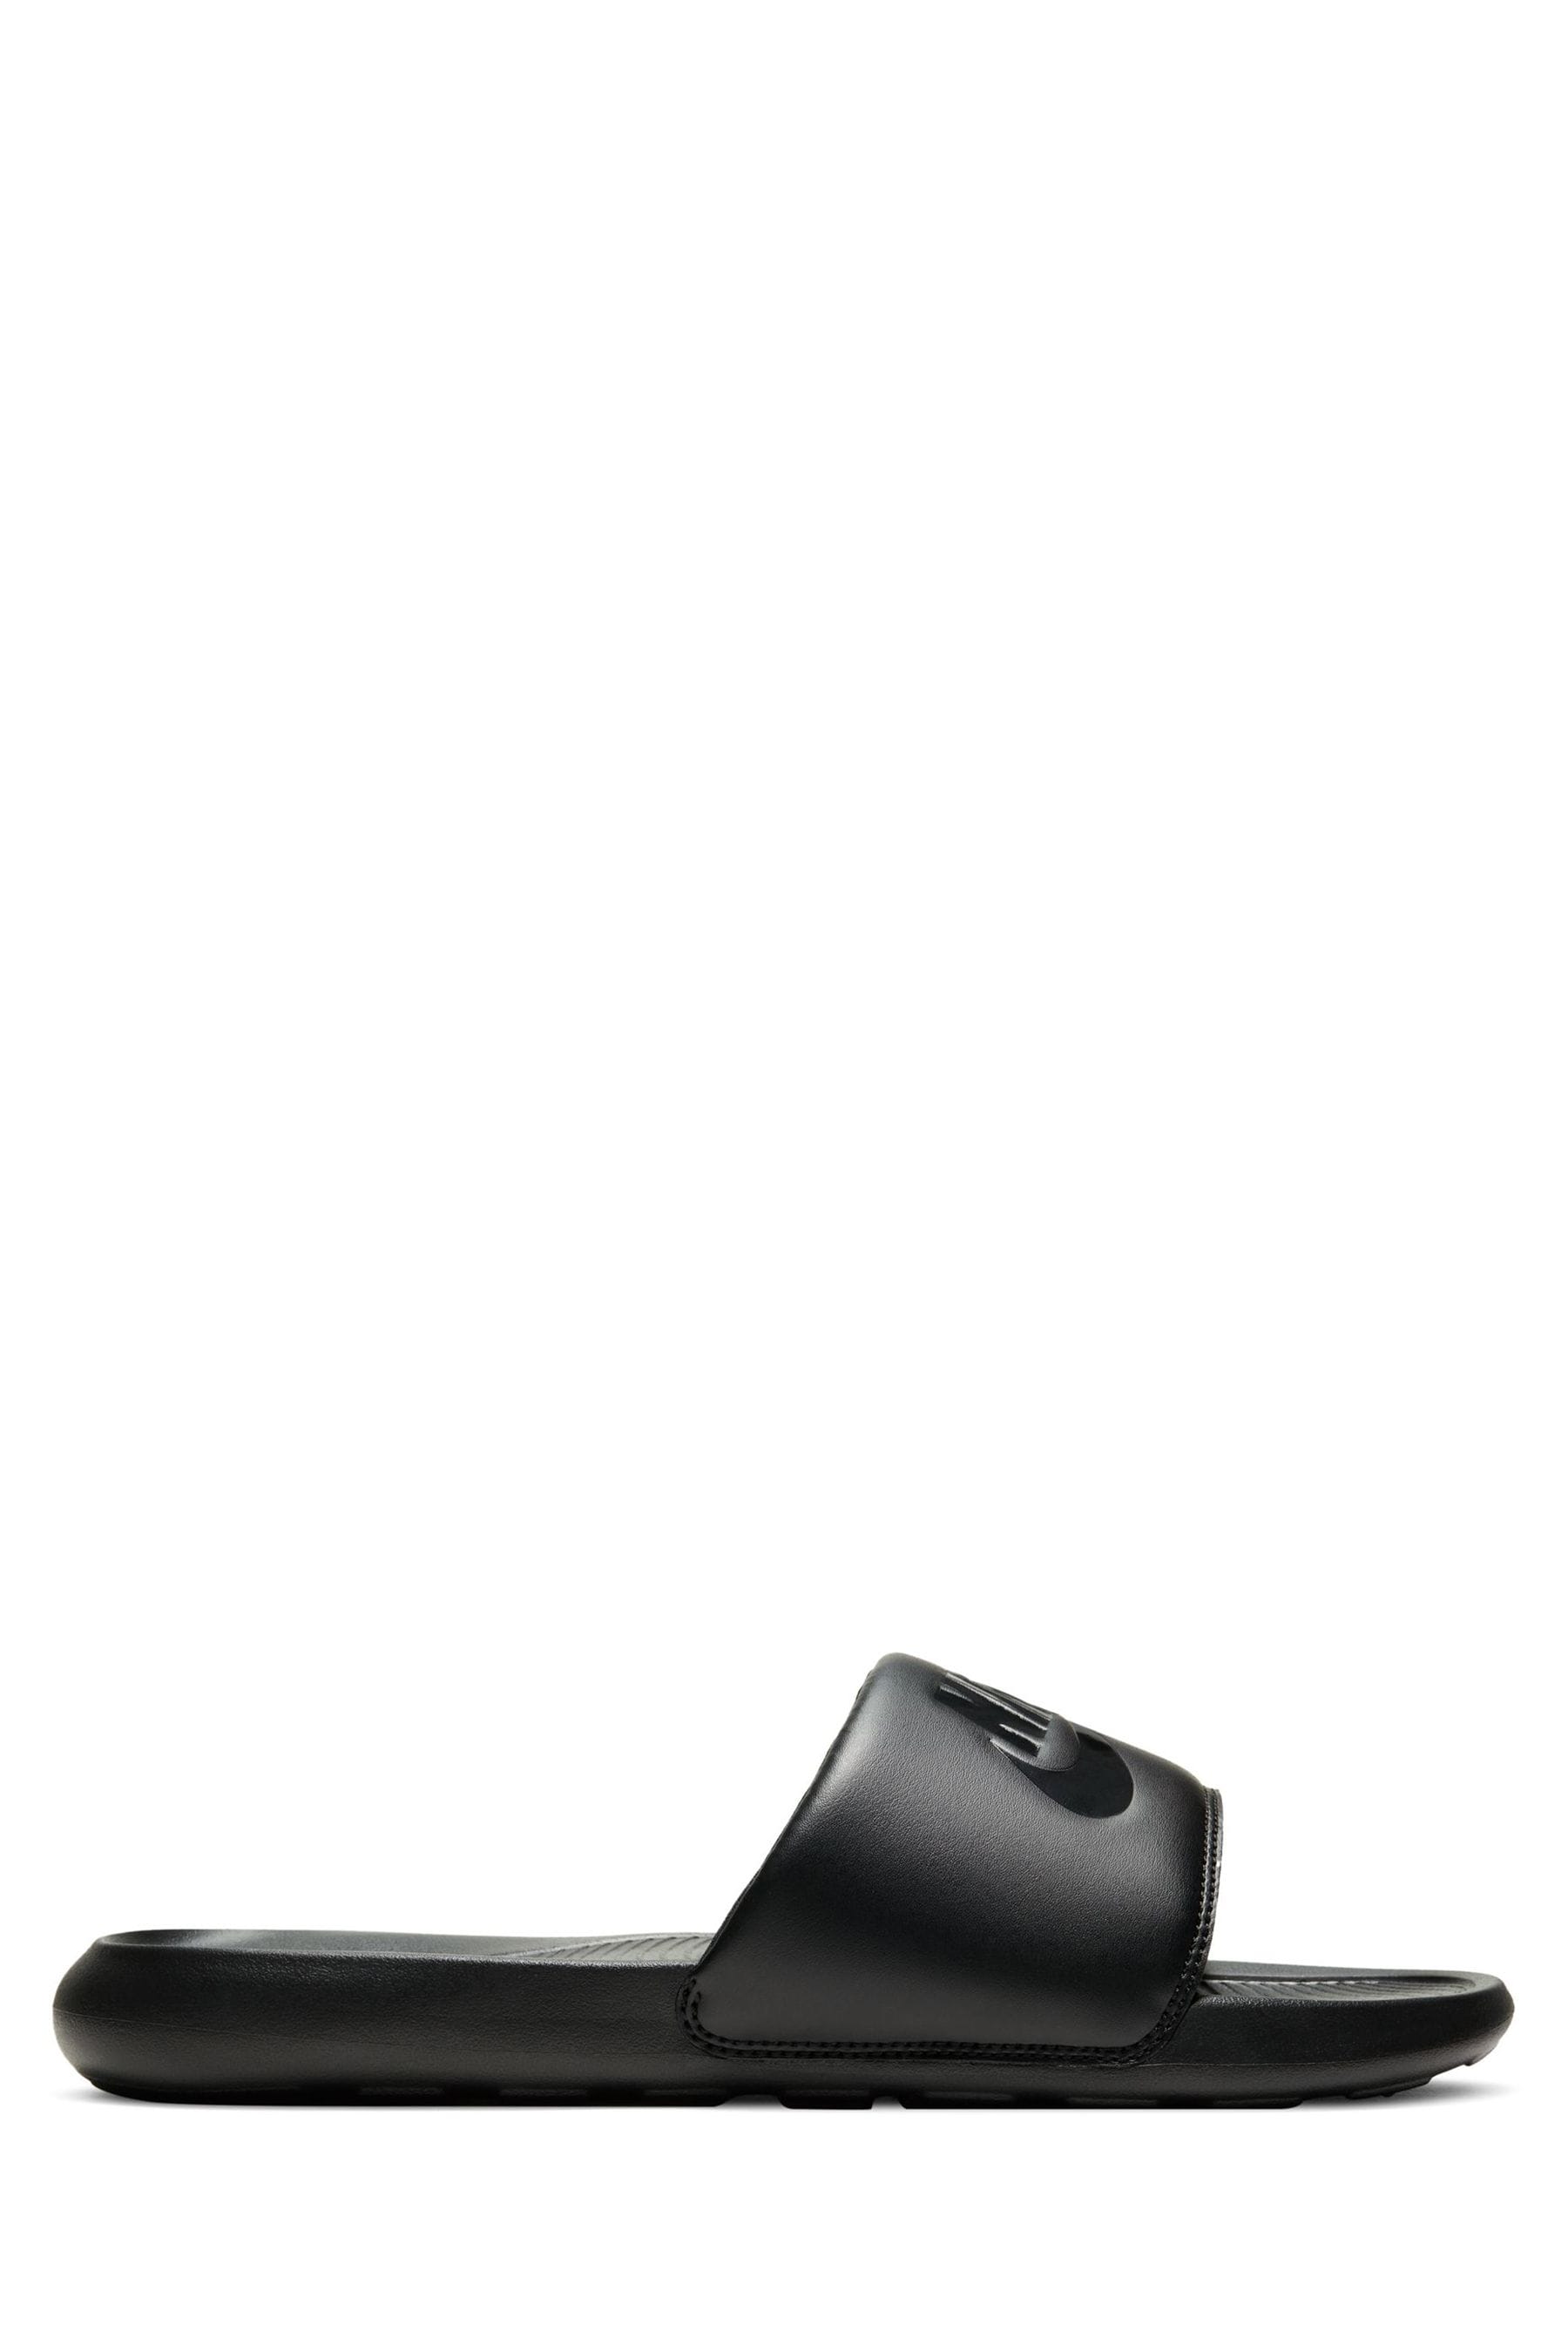 Buy Nike Black Victori One Sliders from the Next UK online shop